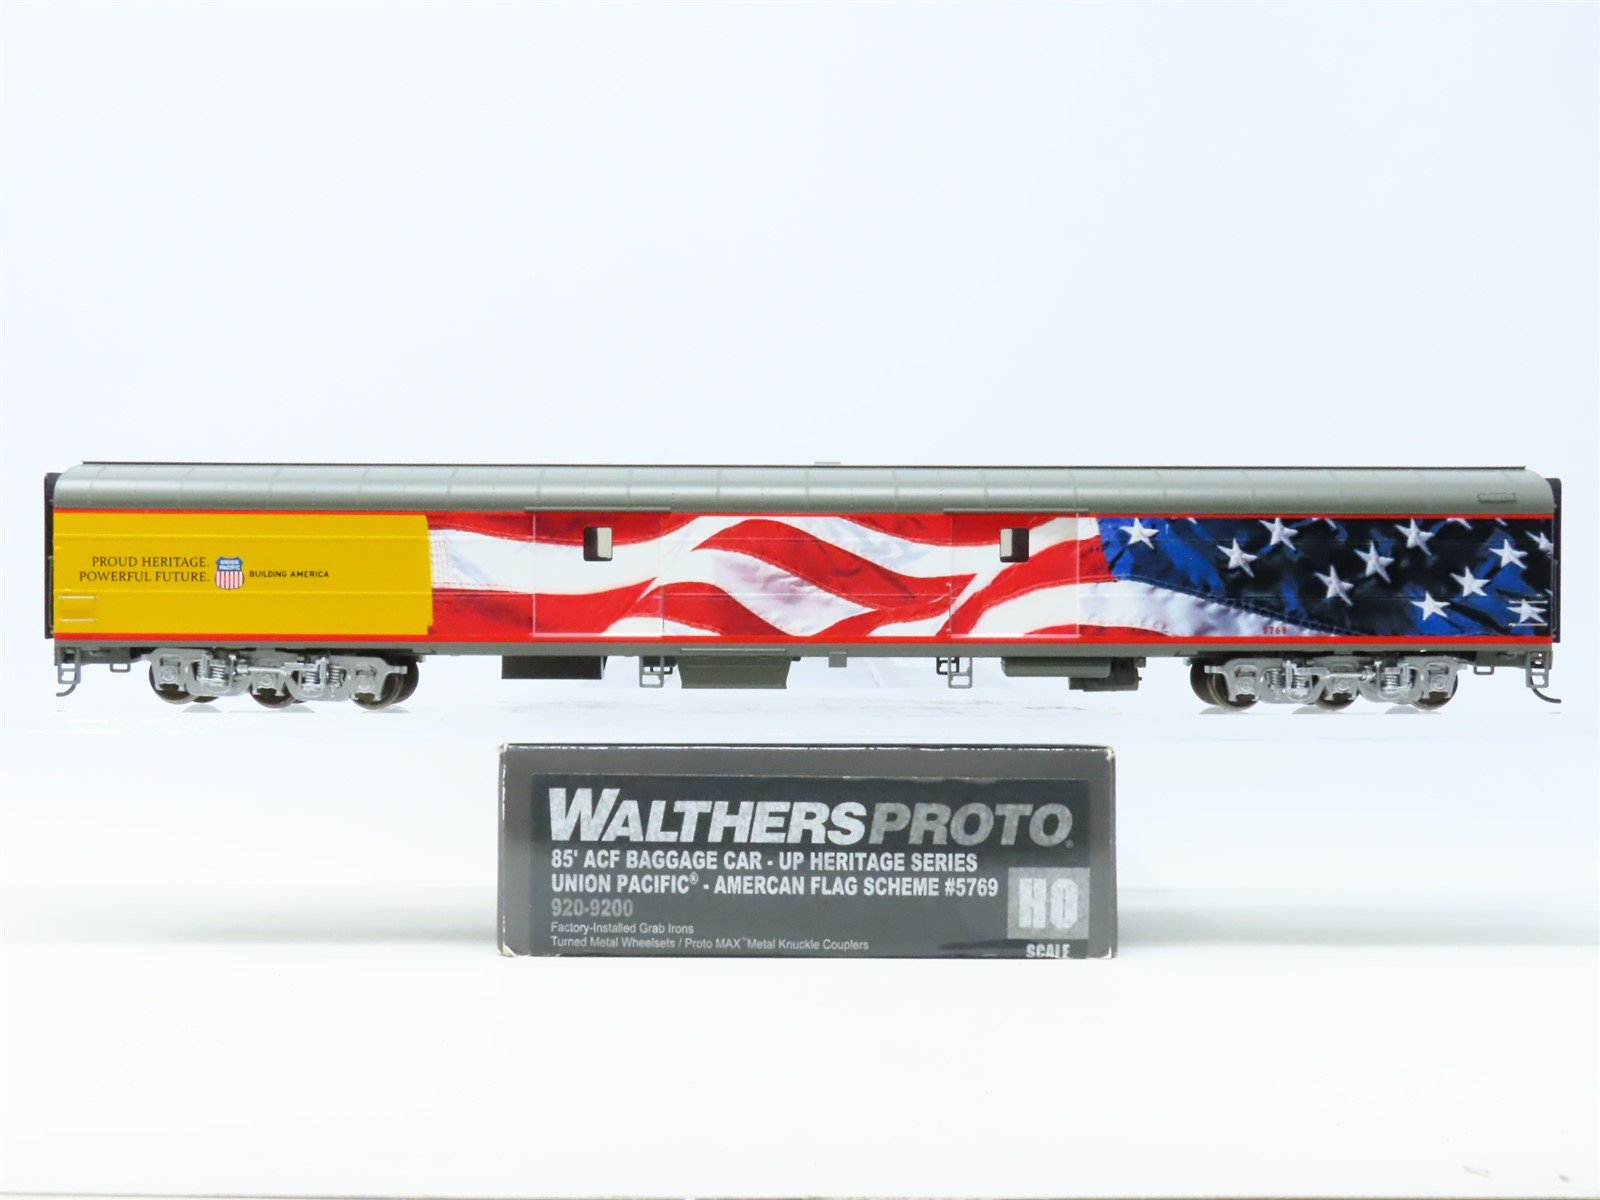 HO Walthers Proto 920-9200 UP Heritage Series "American Flag" Baggage Passenger